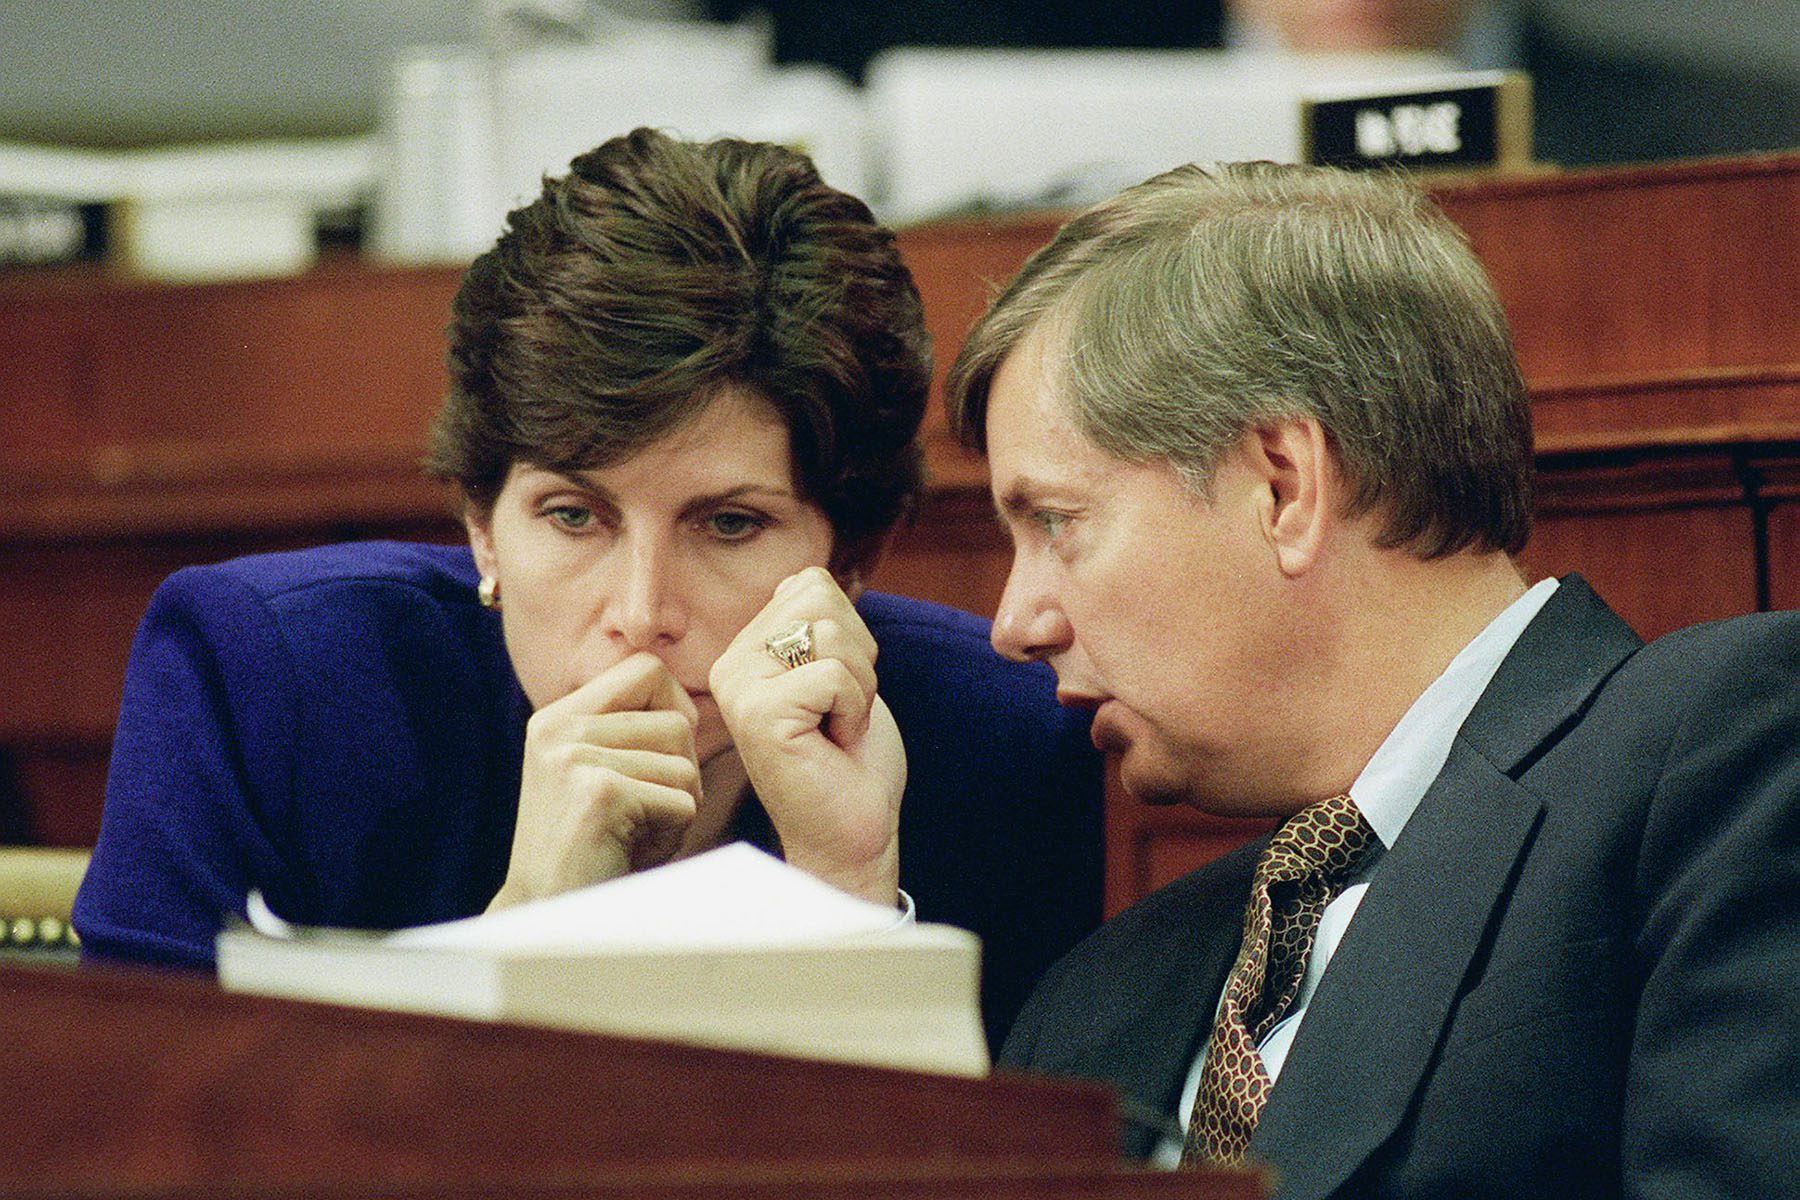 Mary Bono and Lindsey Graham consult with each other during a hearing.